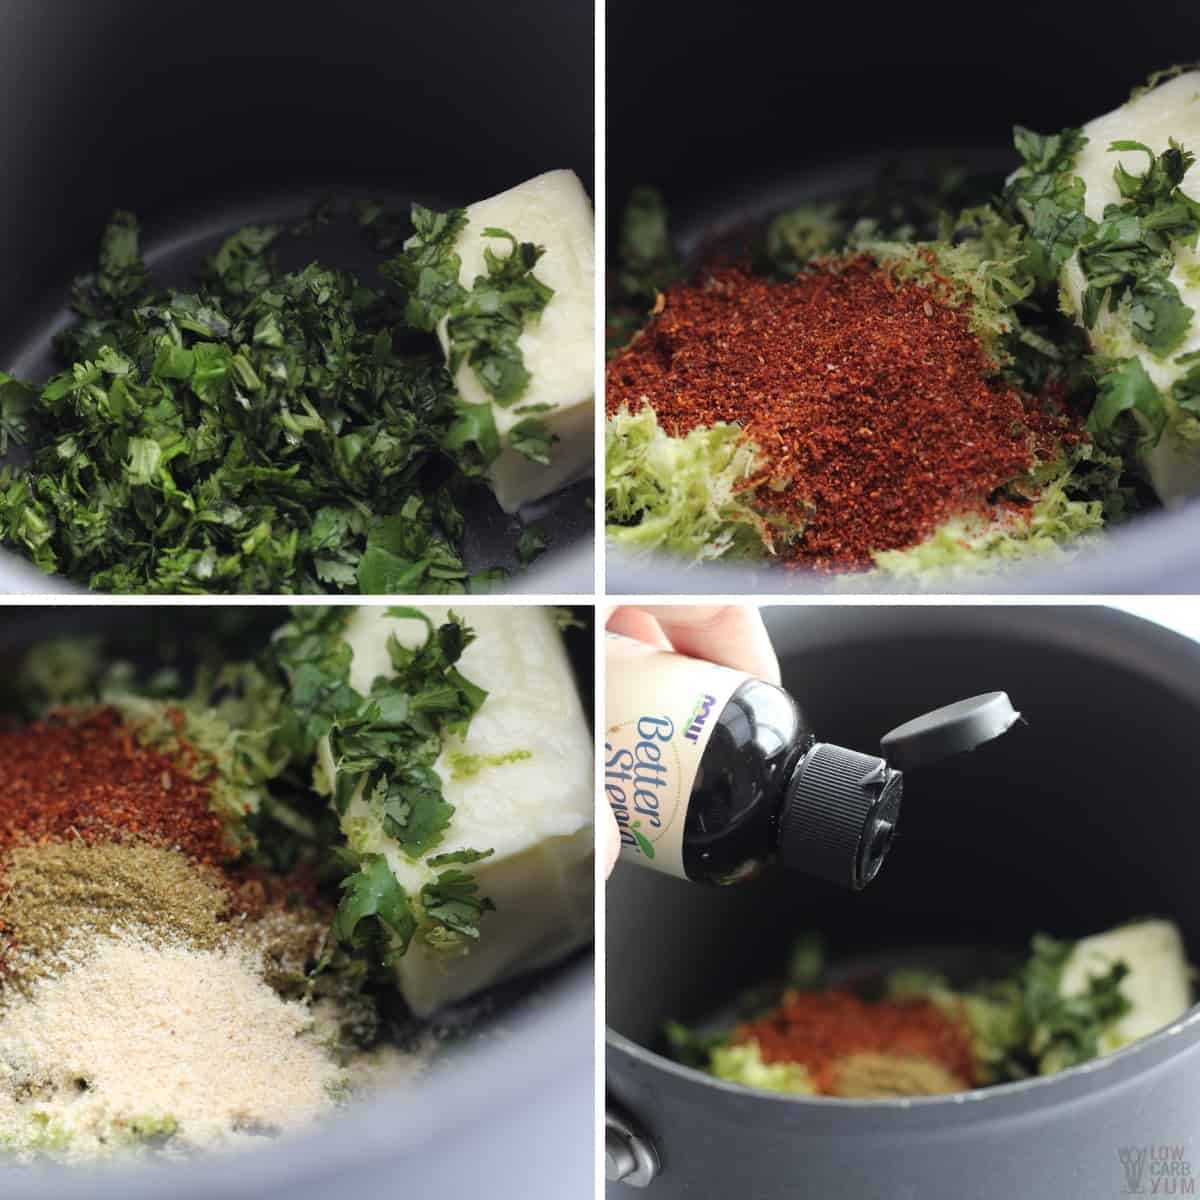 steps to make the buttery chili lime seasoning